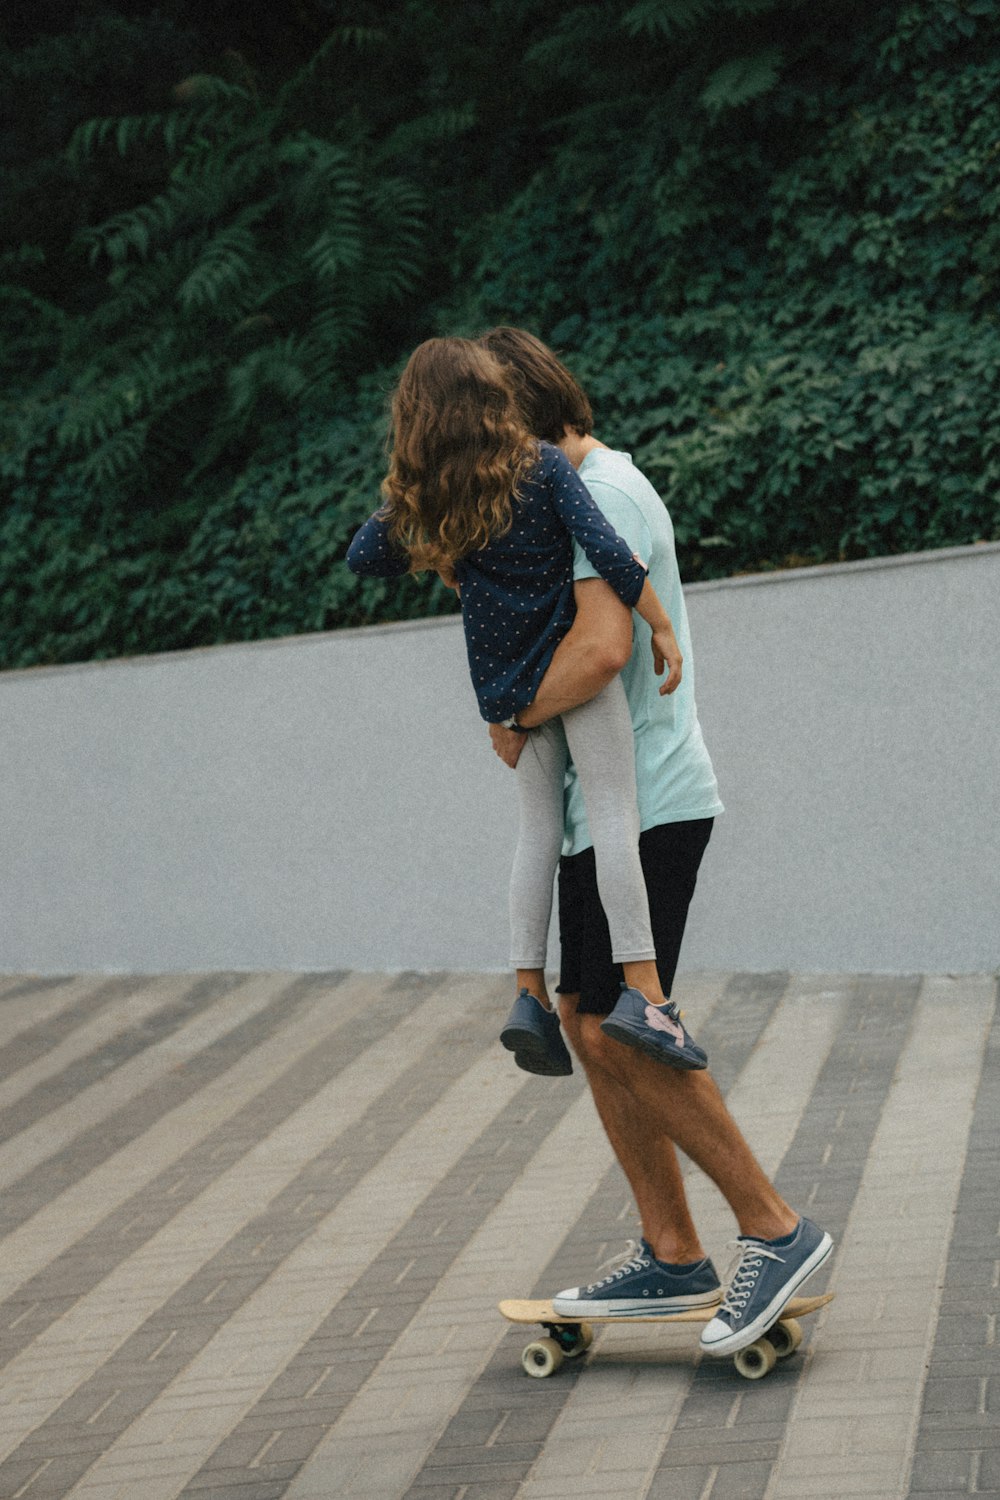 a man riding a skateboard with a little girl on his back